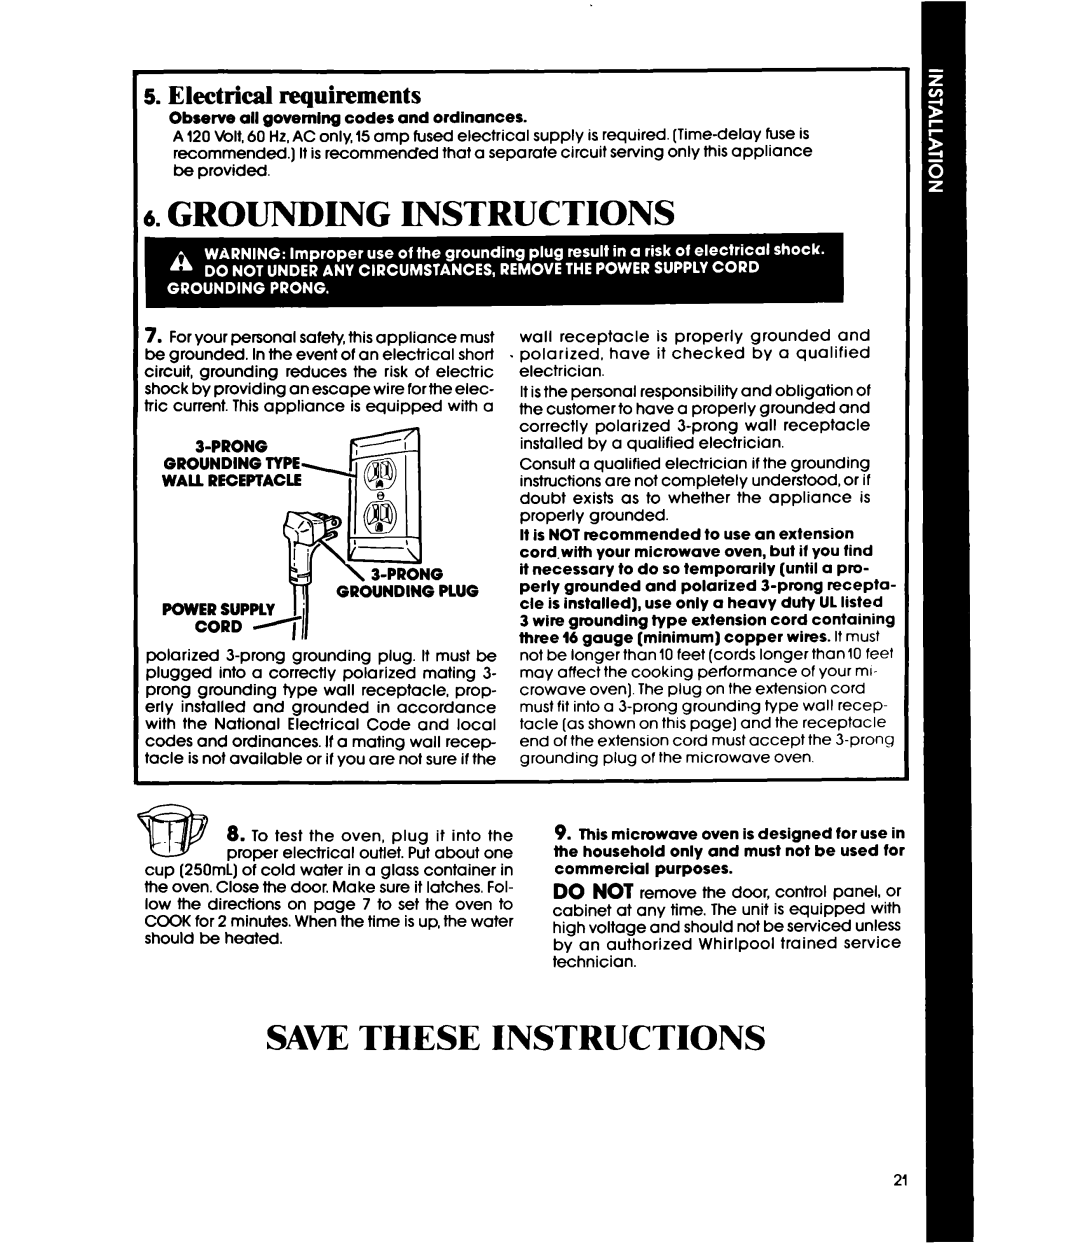 Whirlpool MWl501XS, MWl500XS manual Grounding Instructions, Electrical requirements, Saw These Instructions 